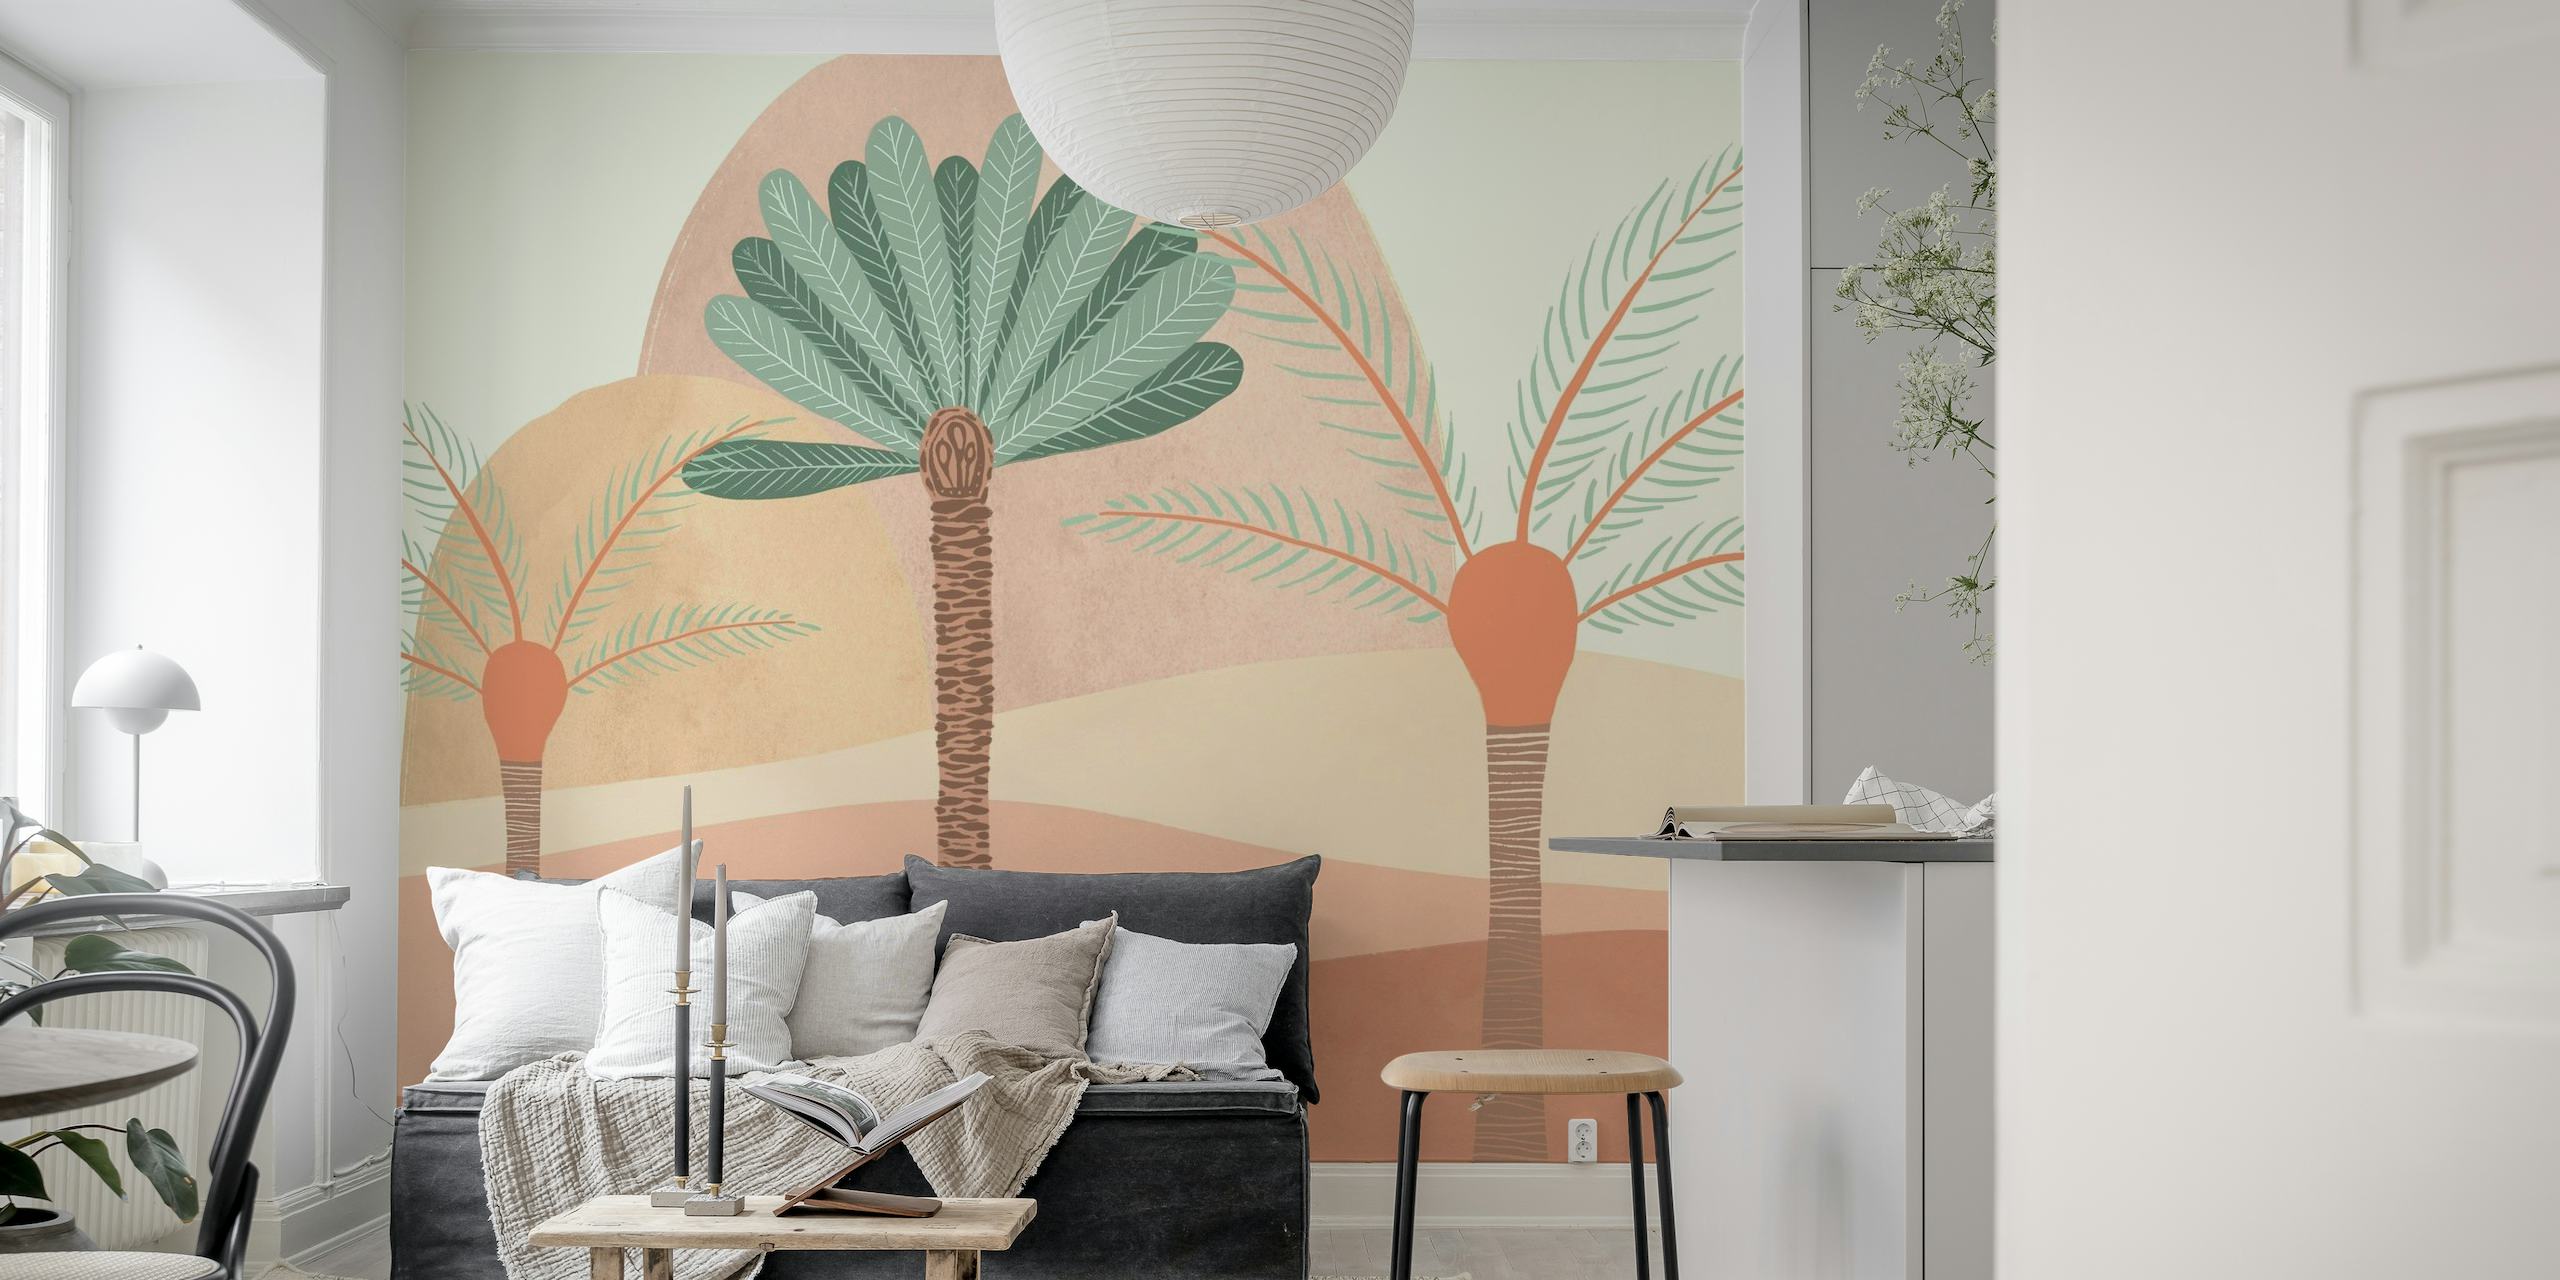 Peachy Sands serene desert wall mural with stylized flora in soft peach and sandy tones.